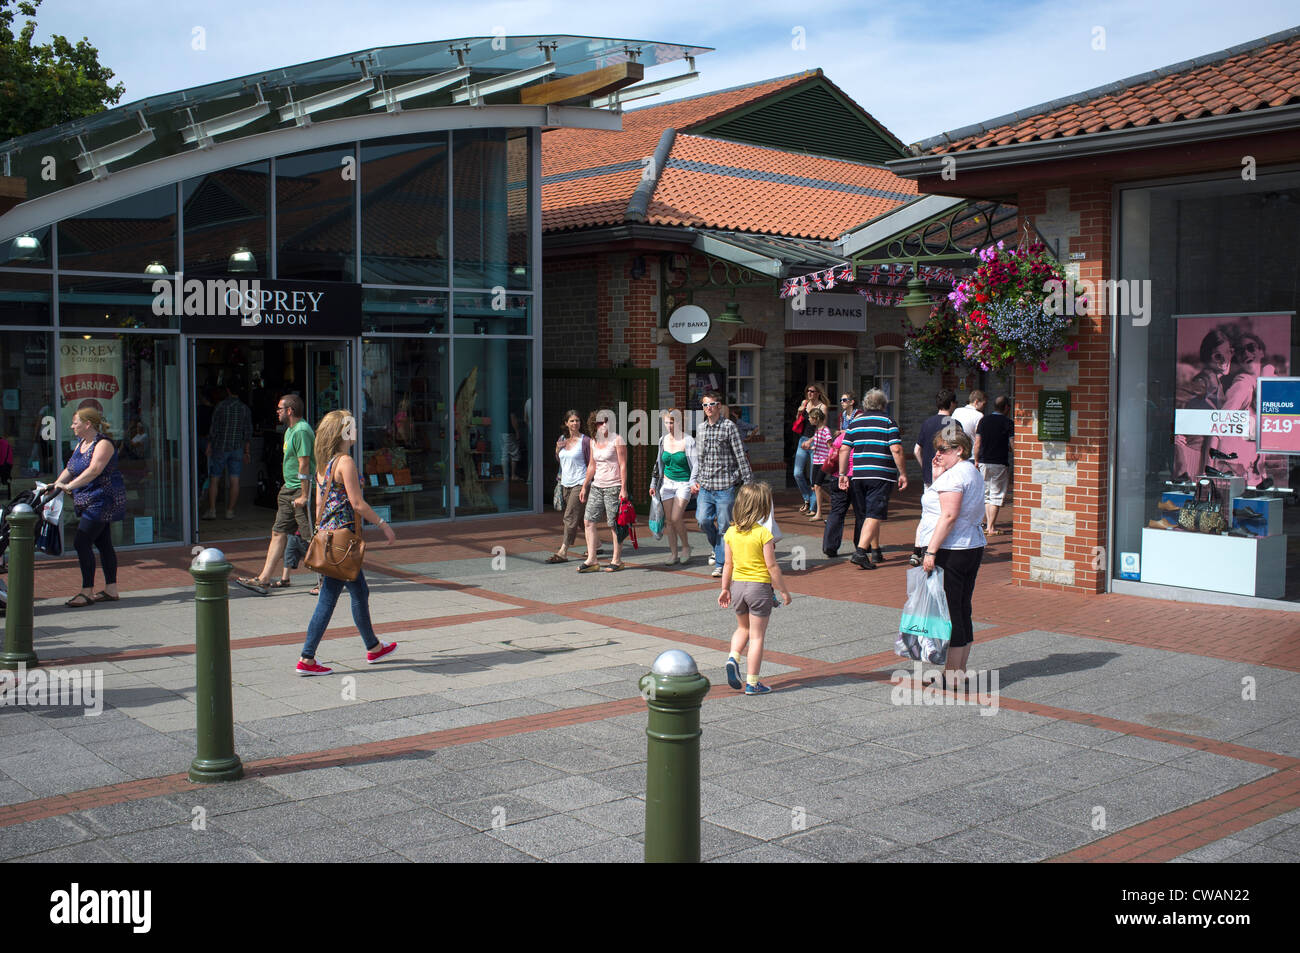 Page 3 - Outlet Village High Resolution Stock Photography and Images - Alamy